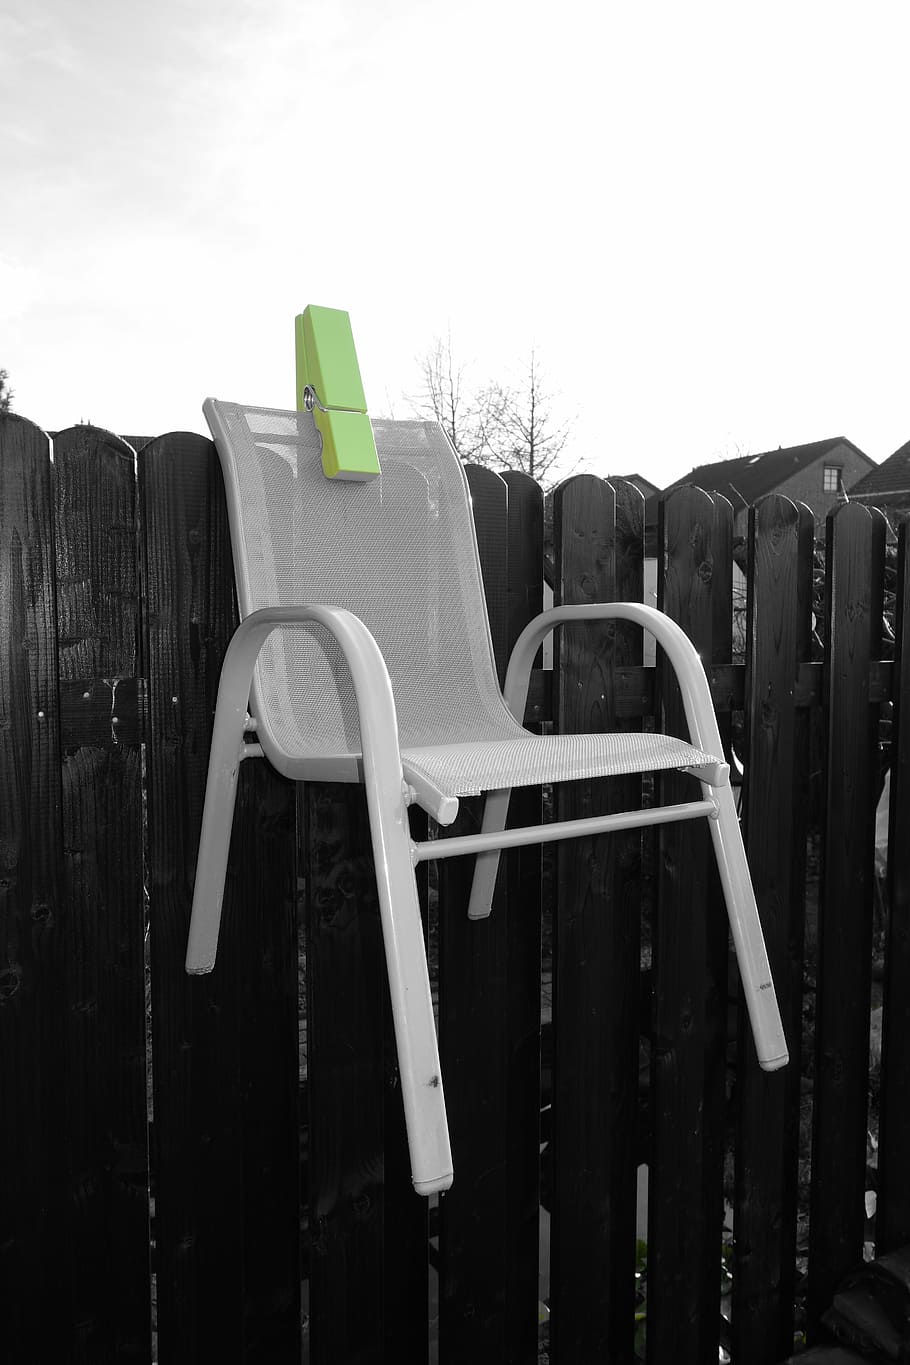 chair, paperclip, green, sky, day, absence, nature, outdoors, side by side, empty